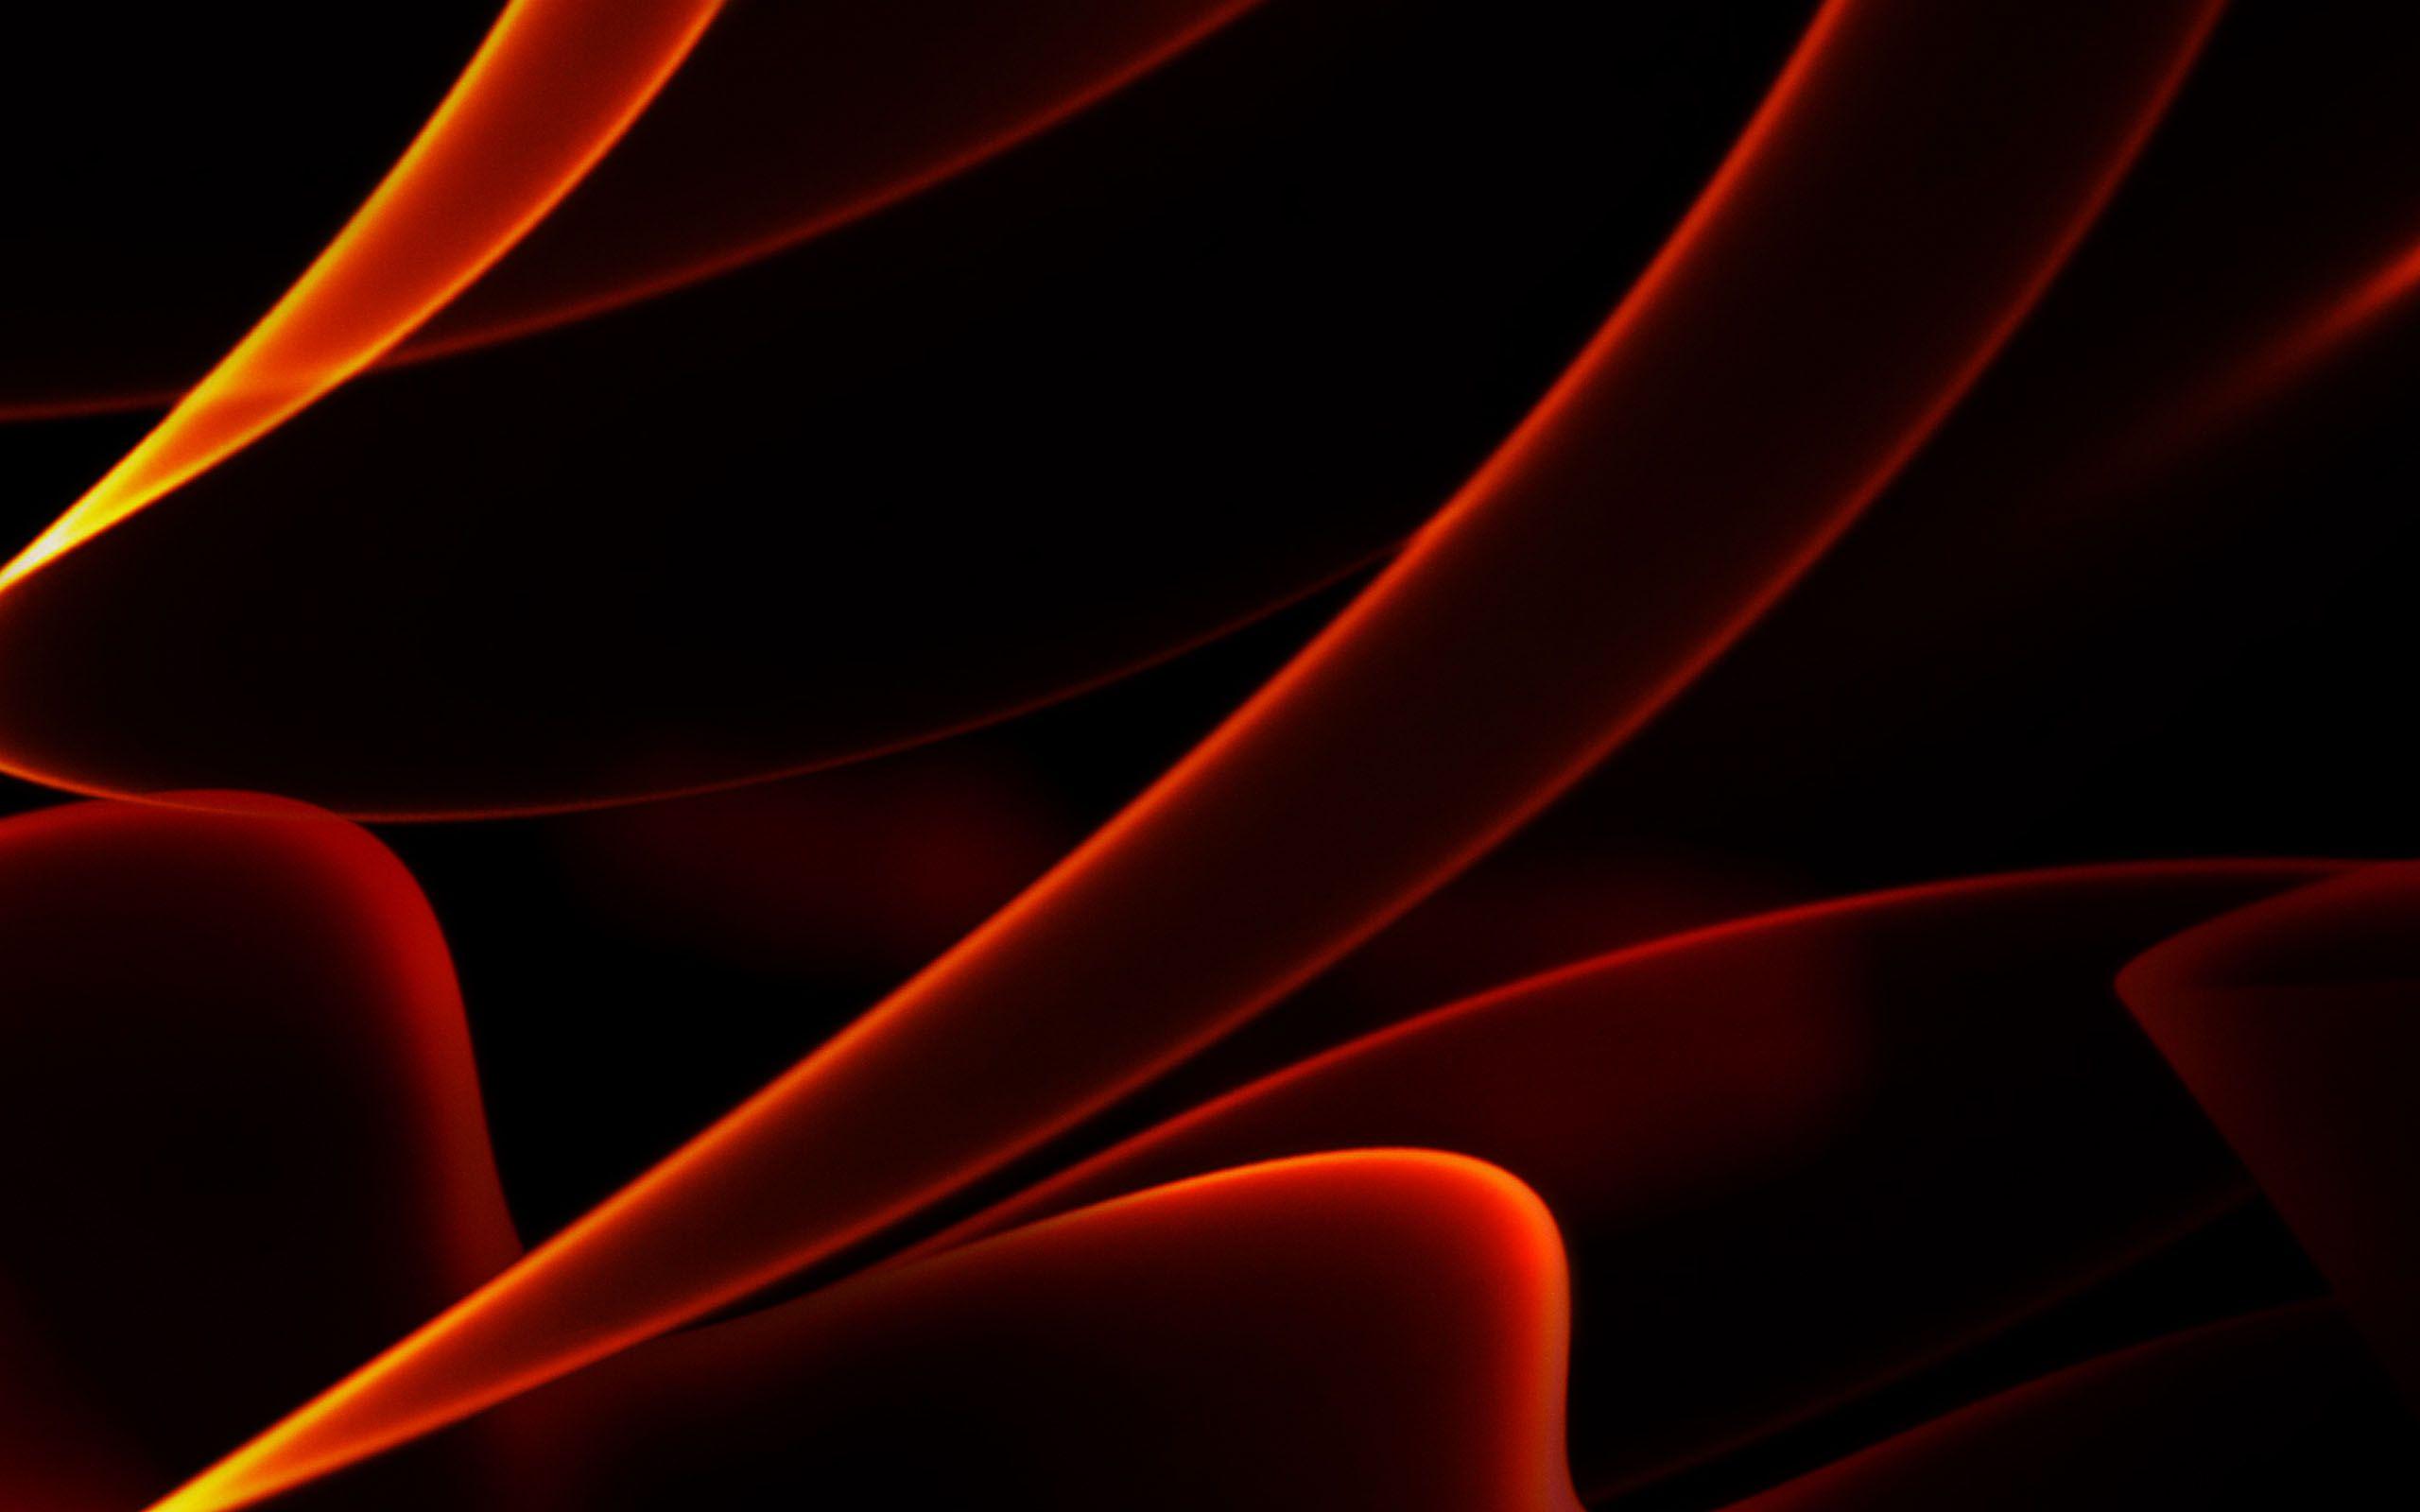 Wallpaper For > Orange And Black Abstract Background